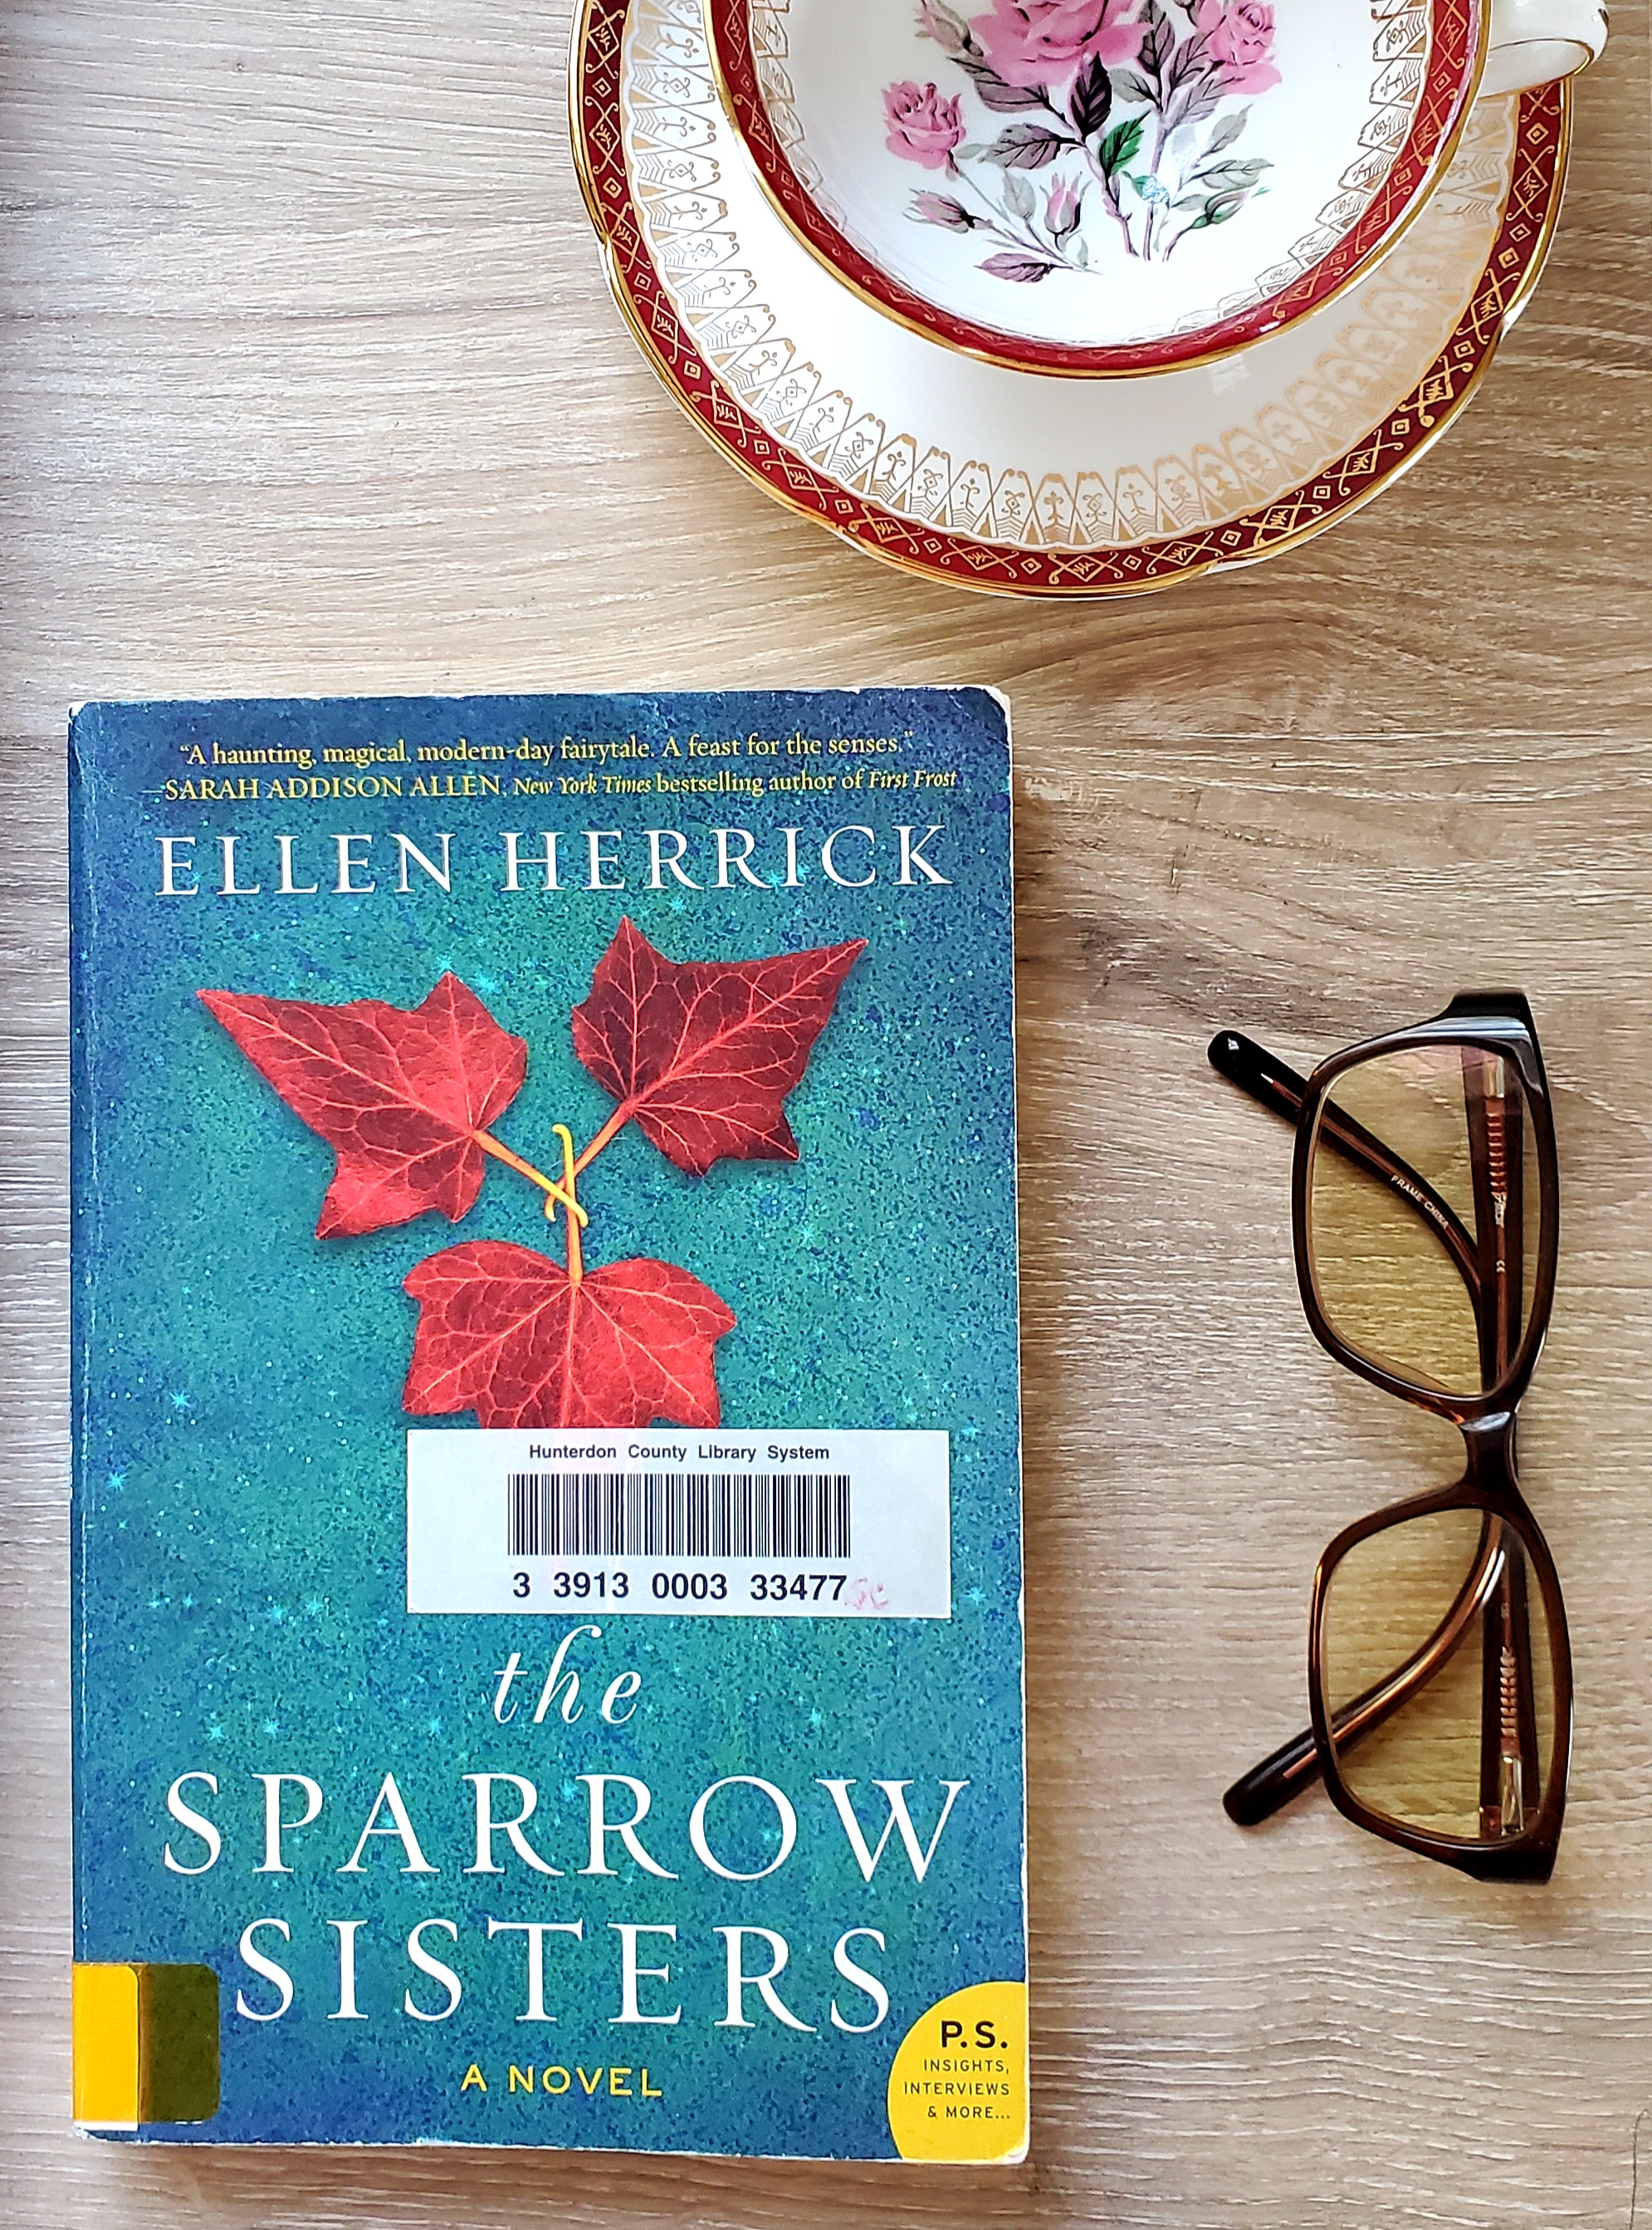 book cover of the sparrow sisters, a pair of reading glasses, and a teacup